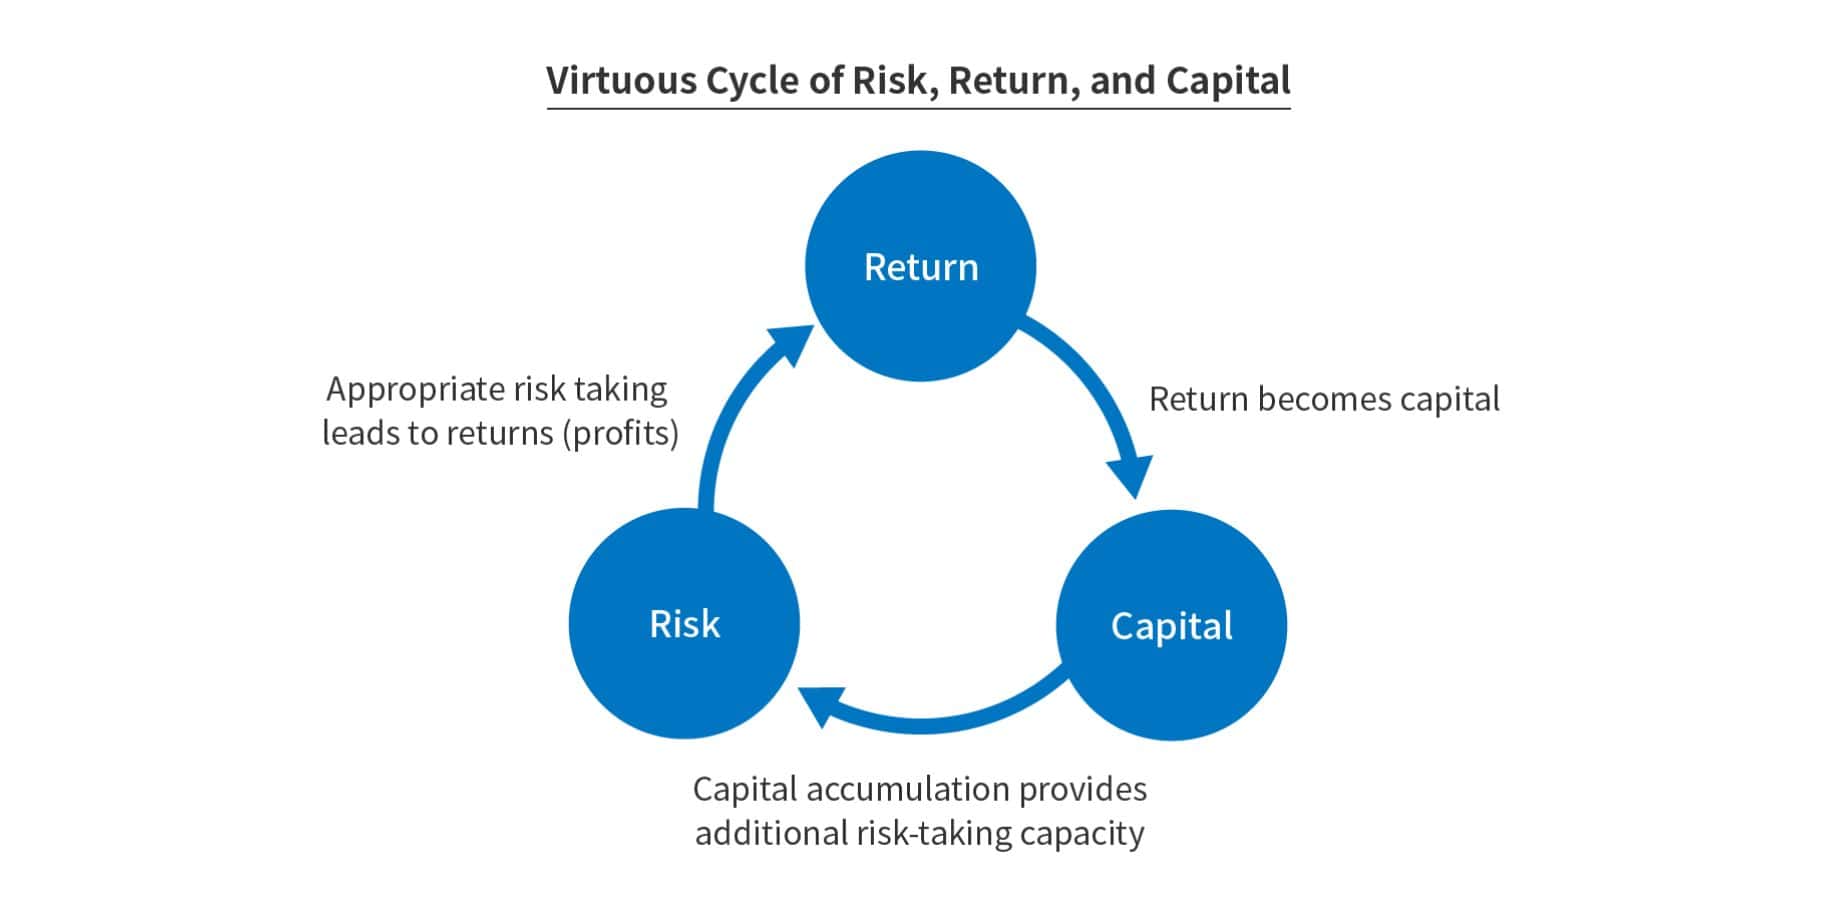 Virtuous Cycle of Risk, Return, and Capital